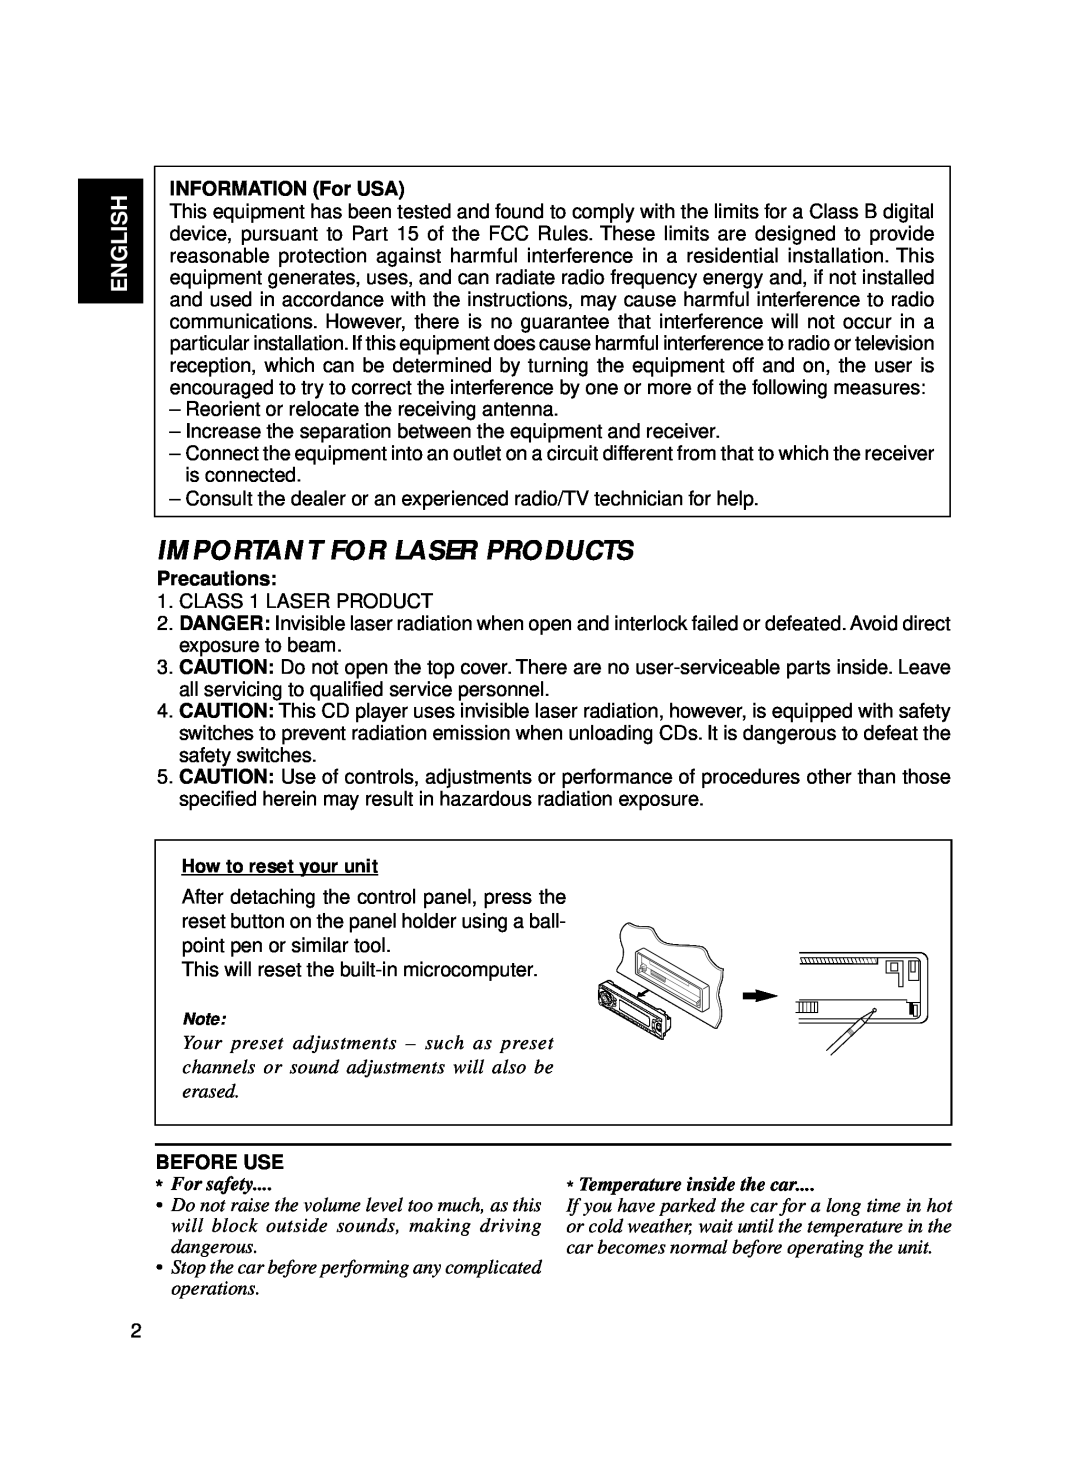 JVC KD-SX770 Important For Laser Products, How to reset your unit, English, INFORMATION For USA, Precautions, Before Use 